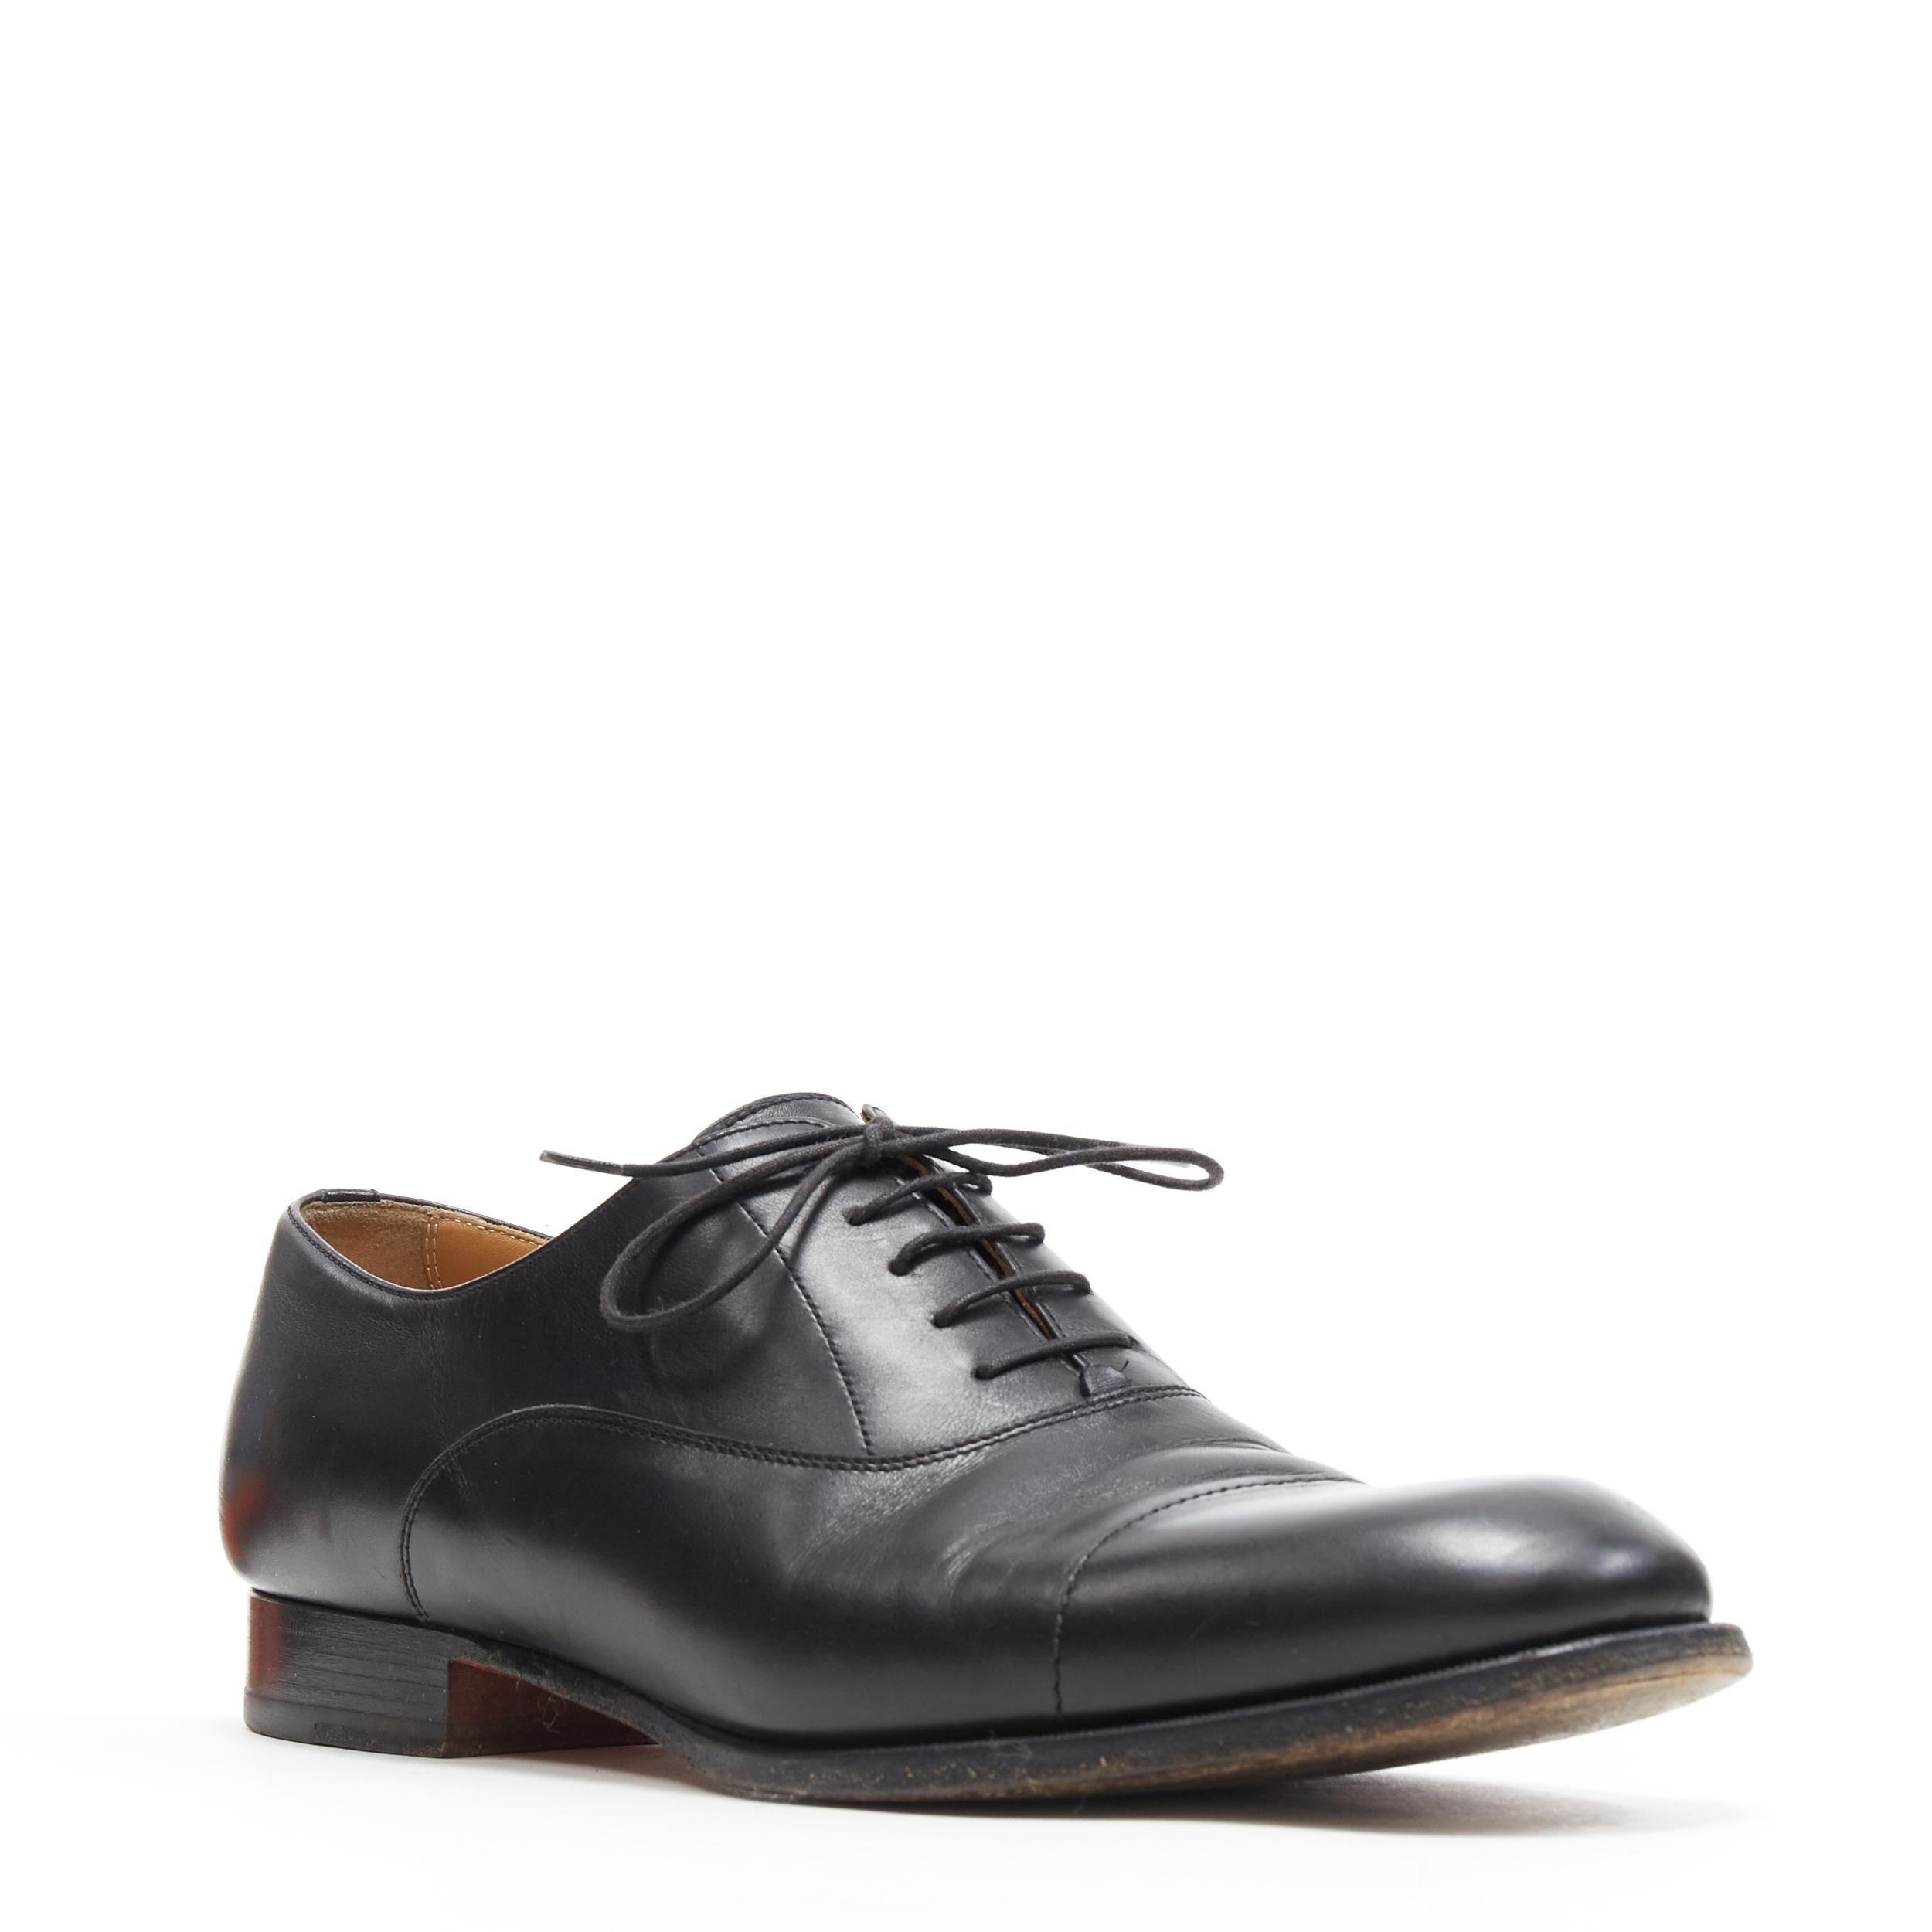 HERMES black calf leather 5-eyelet lace up derby oxford dress shoes EU43.5
Brand: Hermes
Model Name / Style: Oxford shoes
Material: Leather
Color: Black
Pattern: Solid
Closure: Lace up
Extra Detail: Low (1-1.9 in) heel height. Almond toe.
Made in: